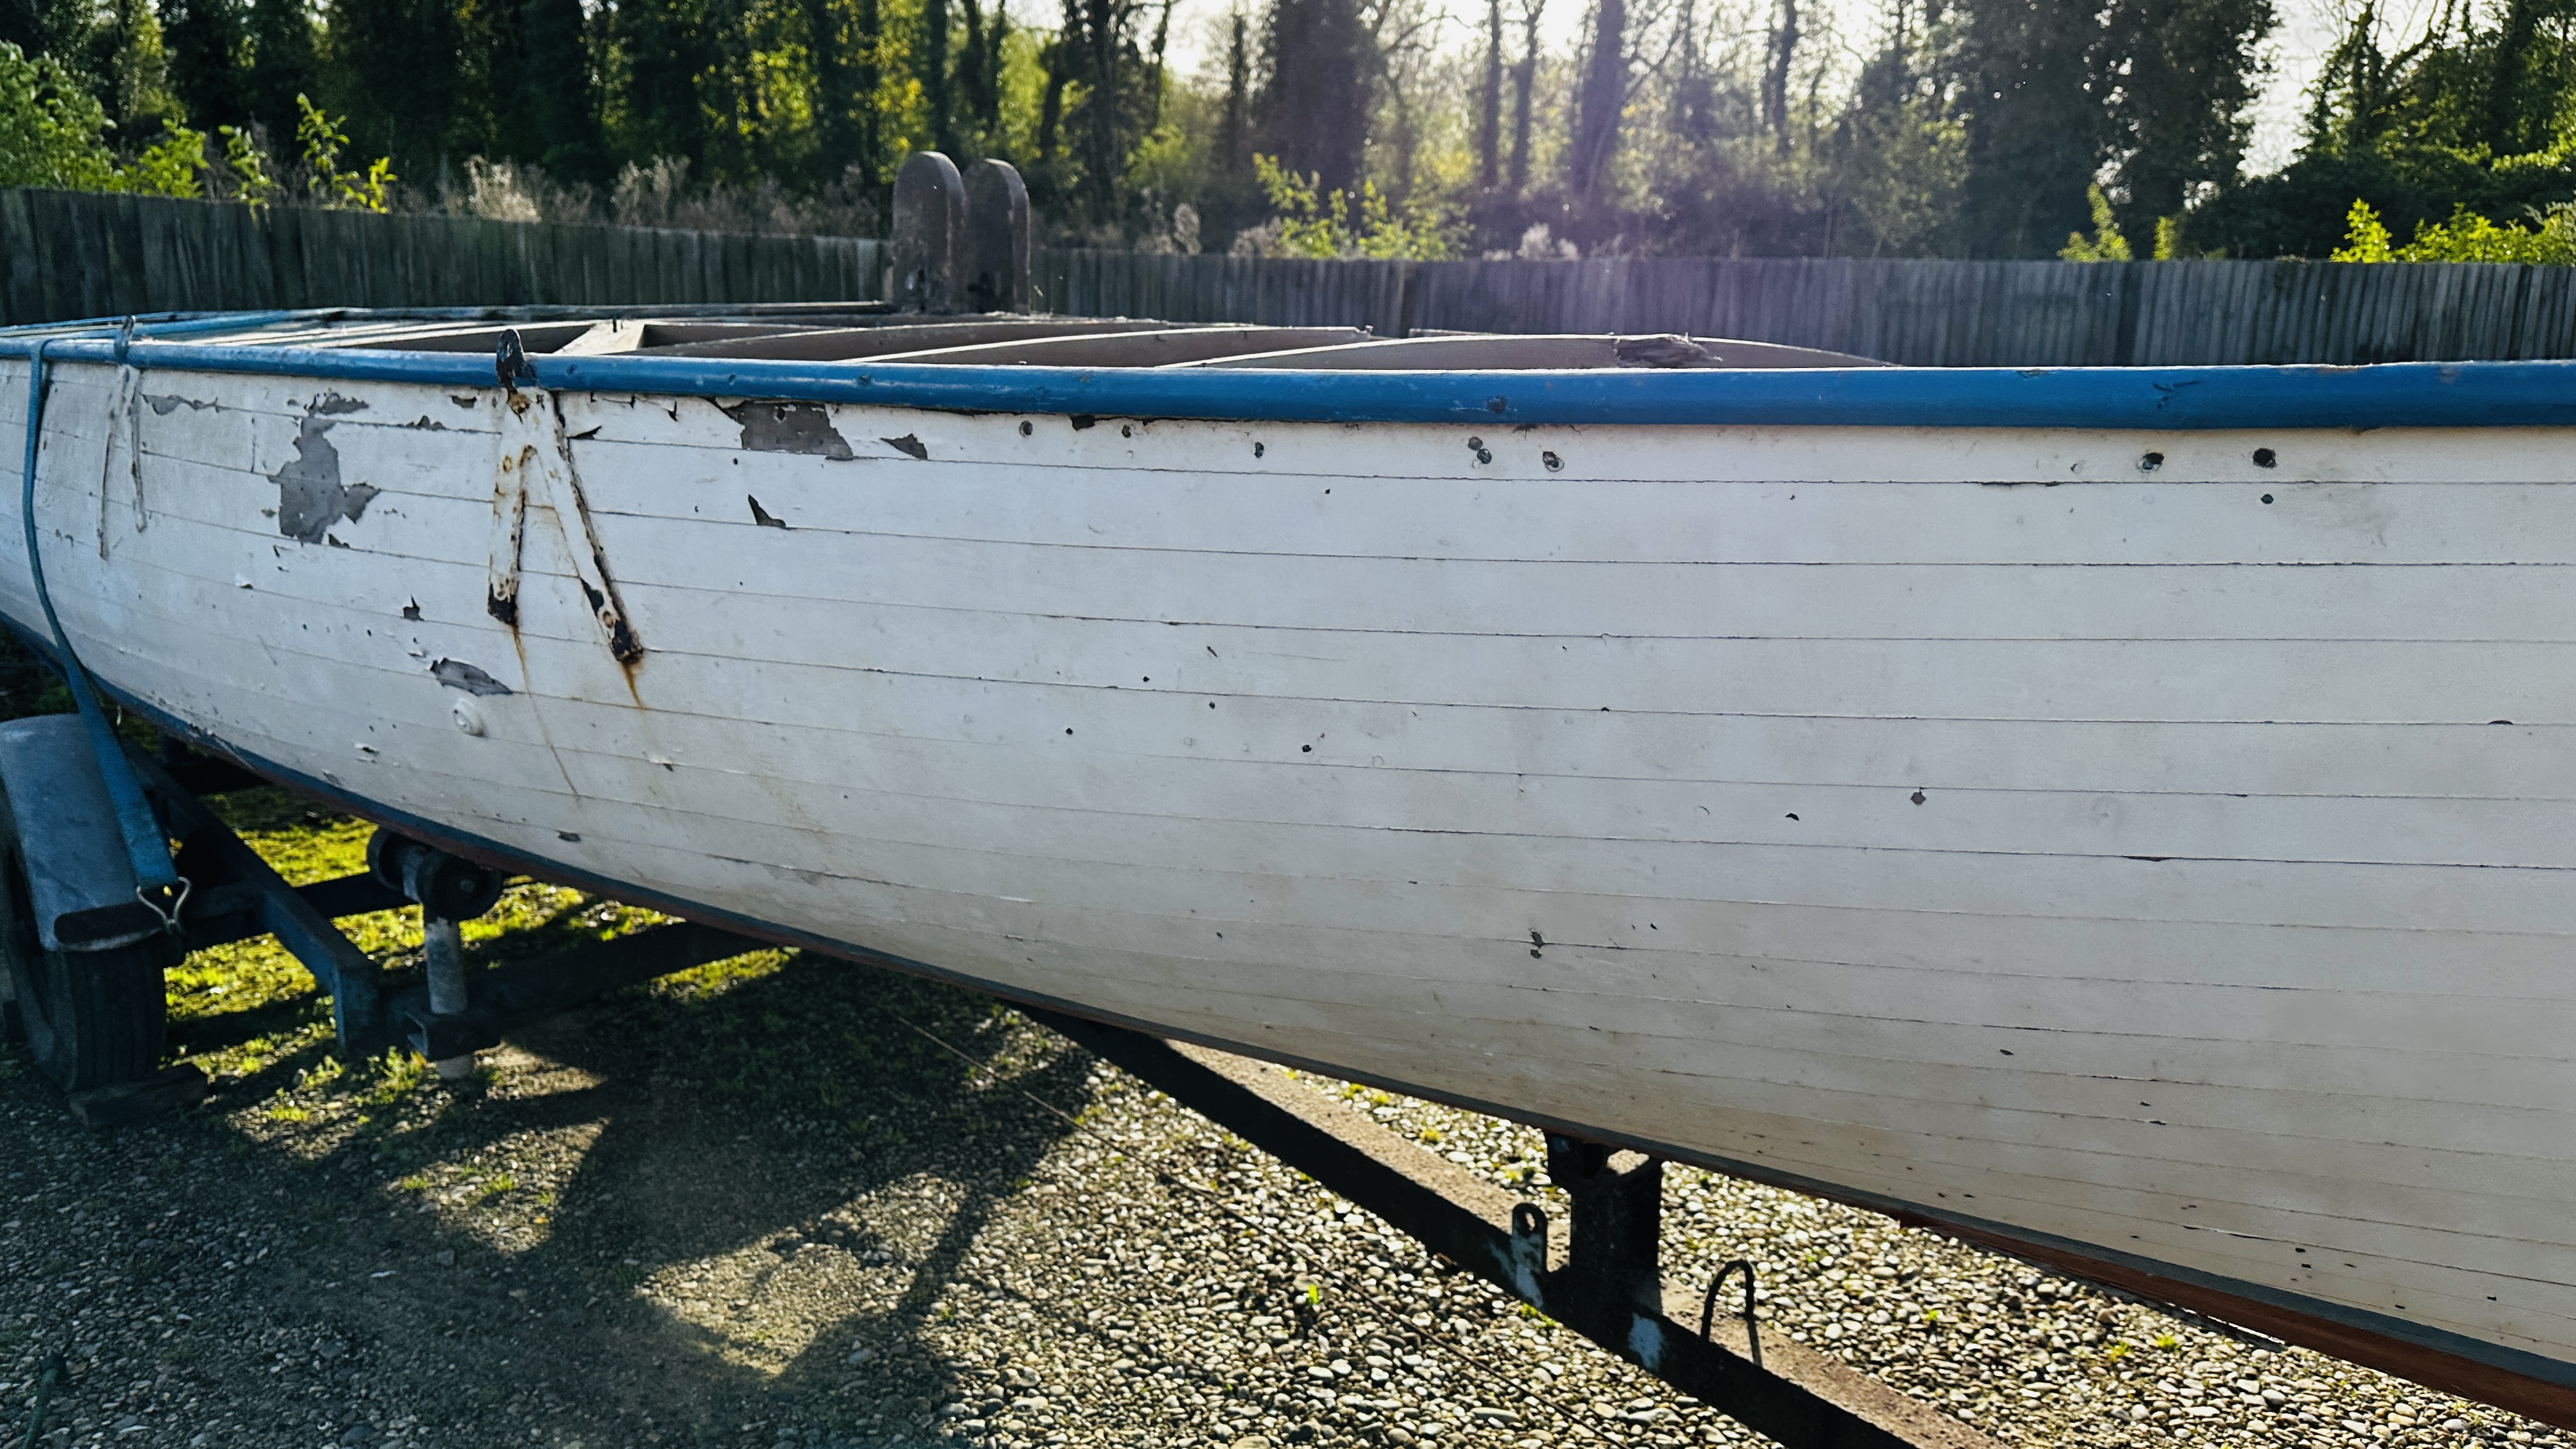 A WW2 UFFA FOX RESCUE BOAT BELIEVED TO BE BUILT BY TAYLOR WOODROW, STAMPED AW11, 1 OF 402 MADE, - Image 3 of 56